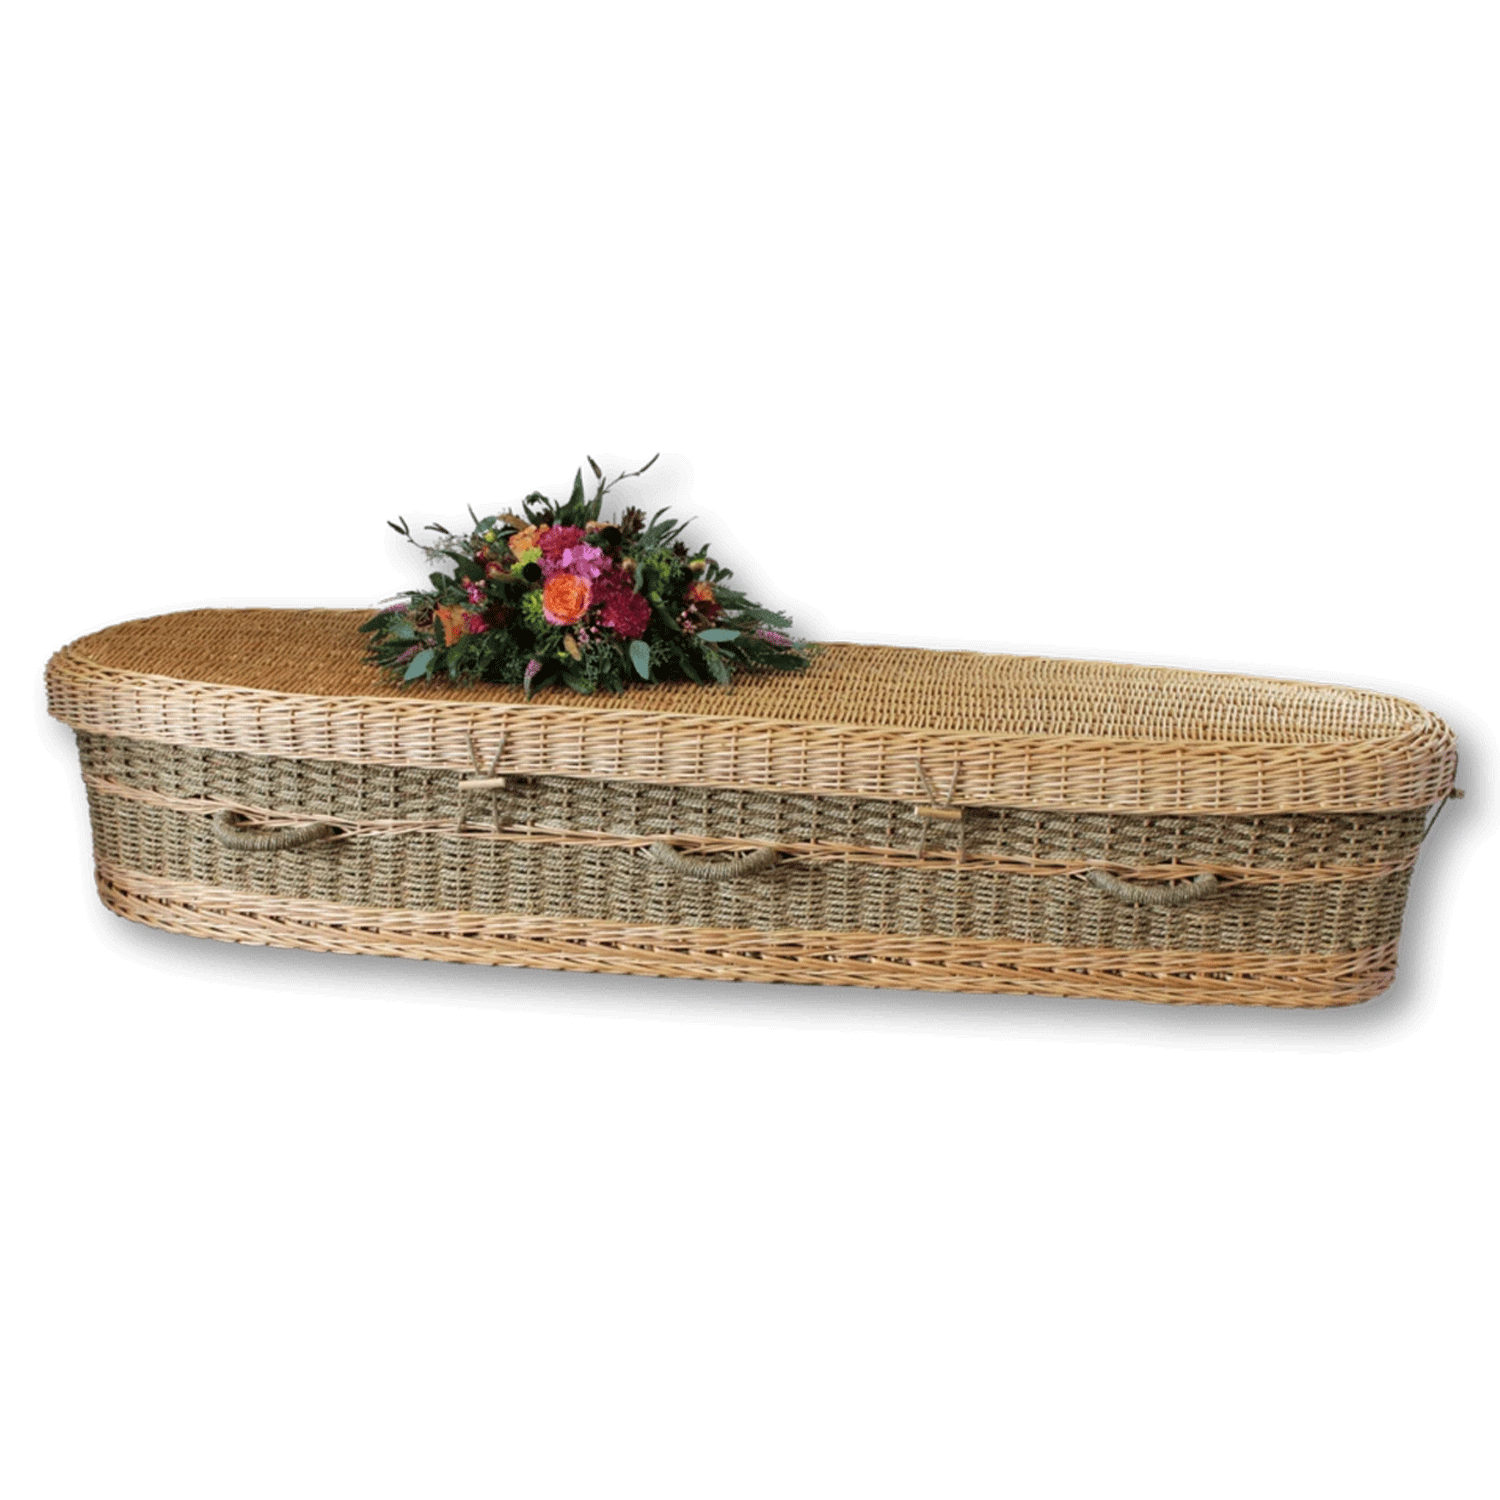 Titan Seagrass | Wicker Casket made from Willow with Seagrass - Titan Casket